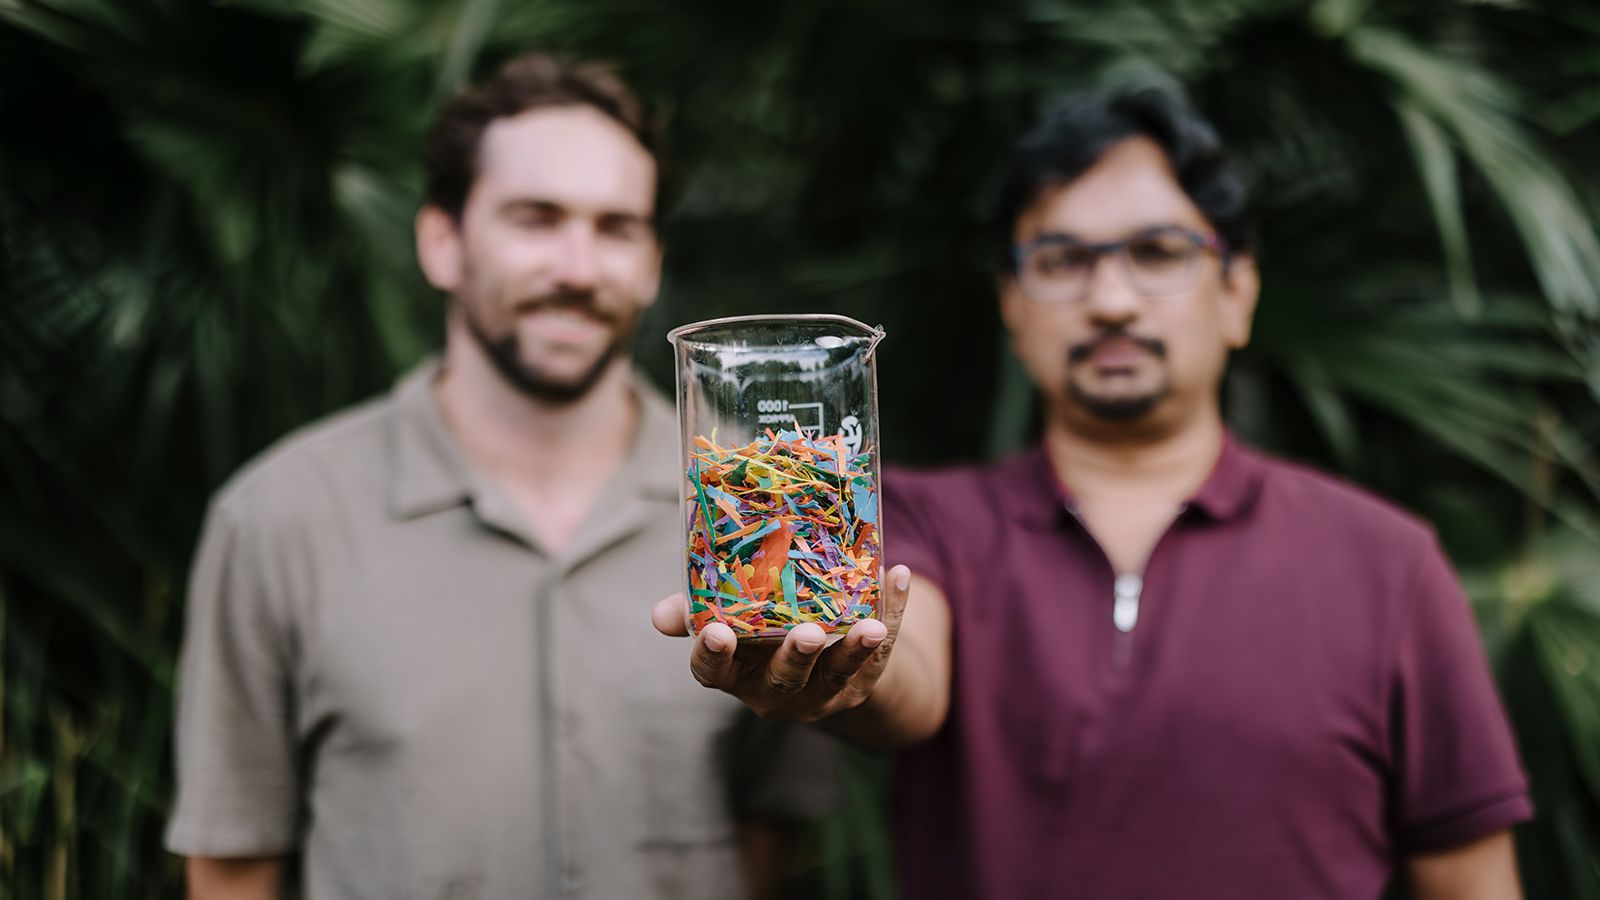 UOW PhD candidate Michael Staplevan and Professor Faisal Hai (out of focus) holding a glass beaker full of colourful plastic pieces (in focus). Photo: Michael Gray